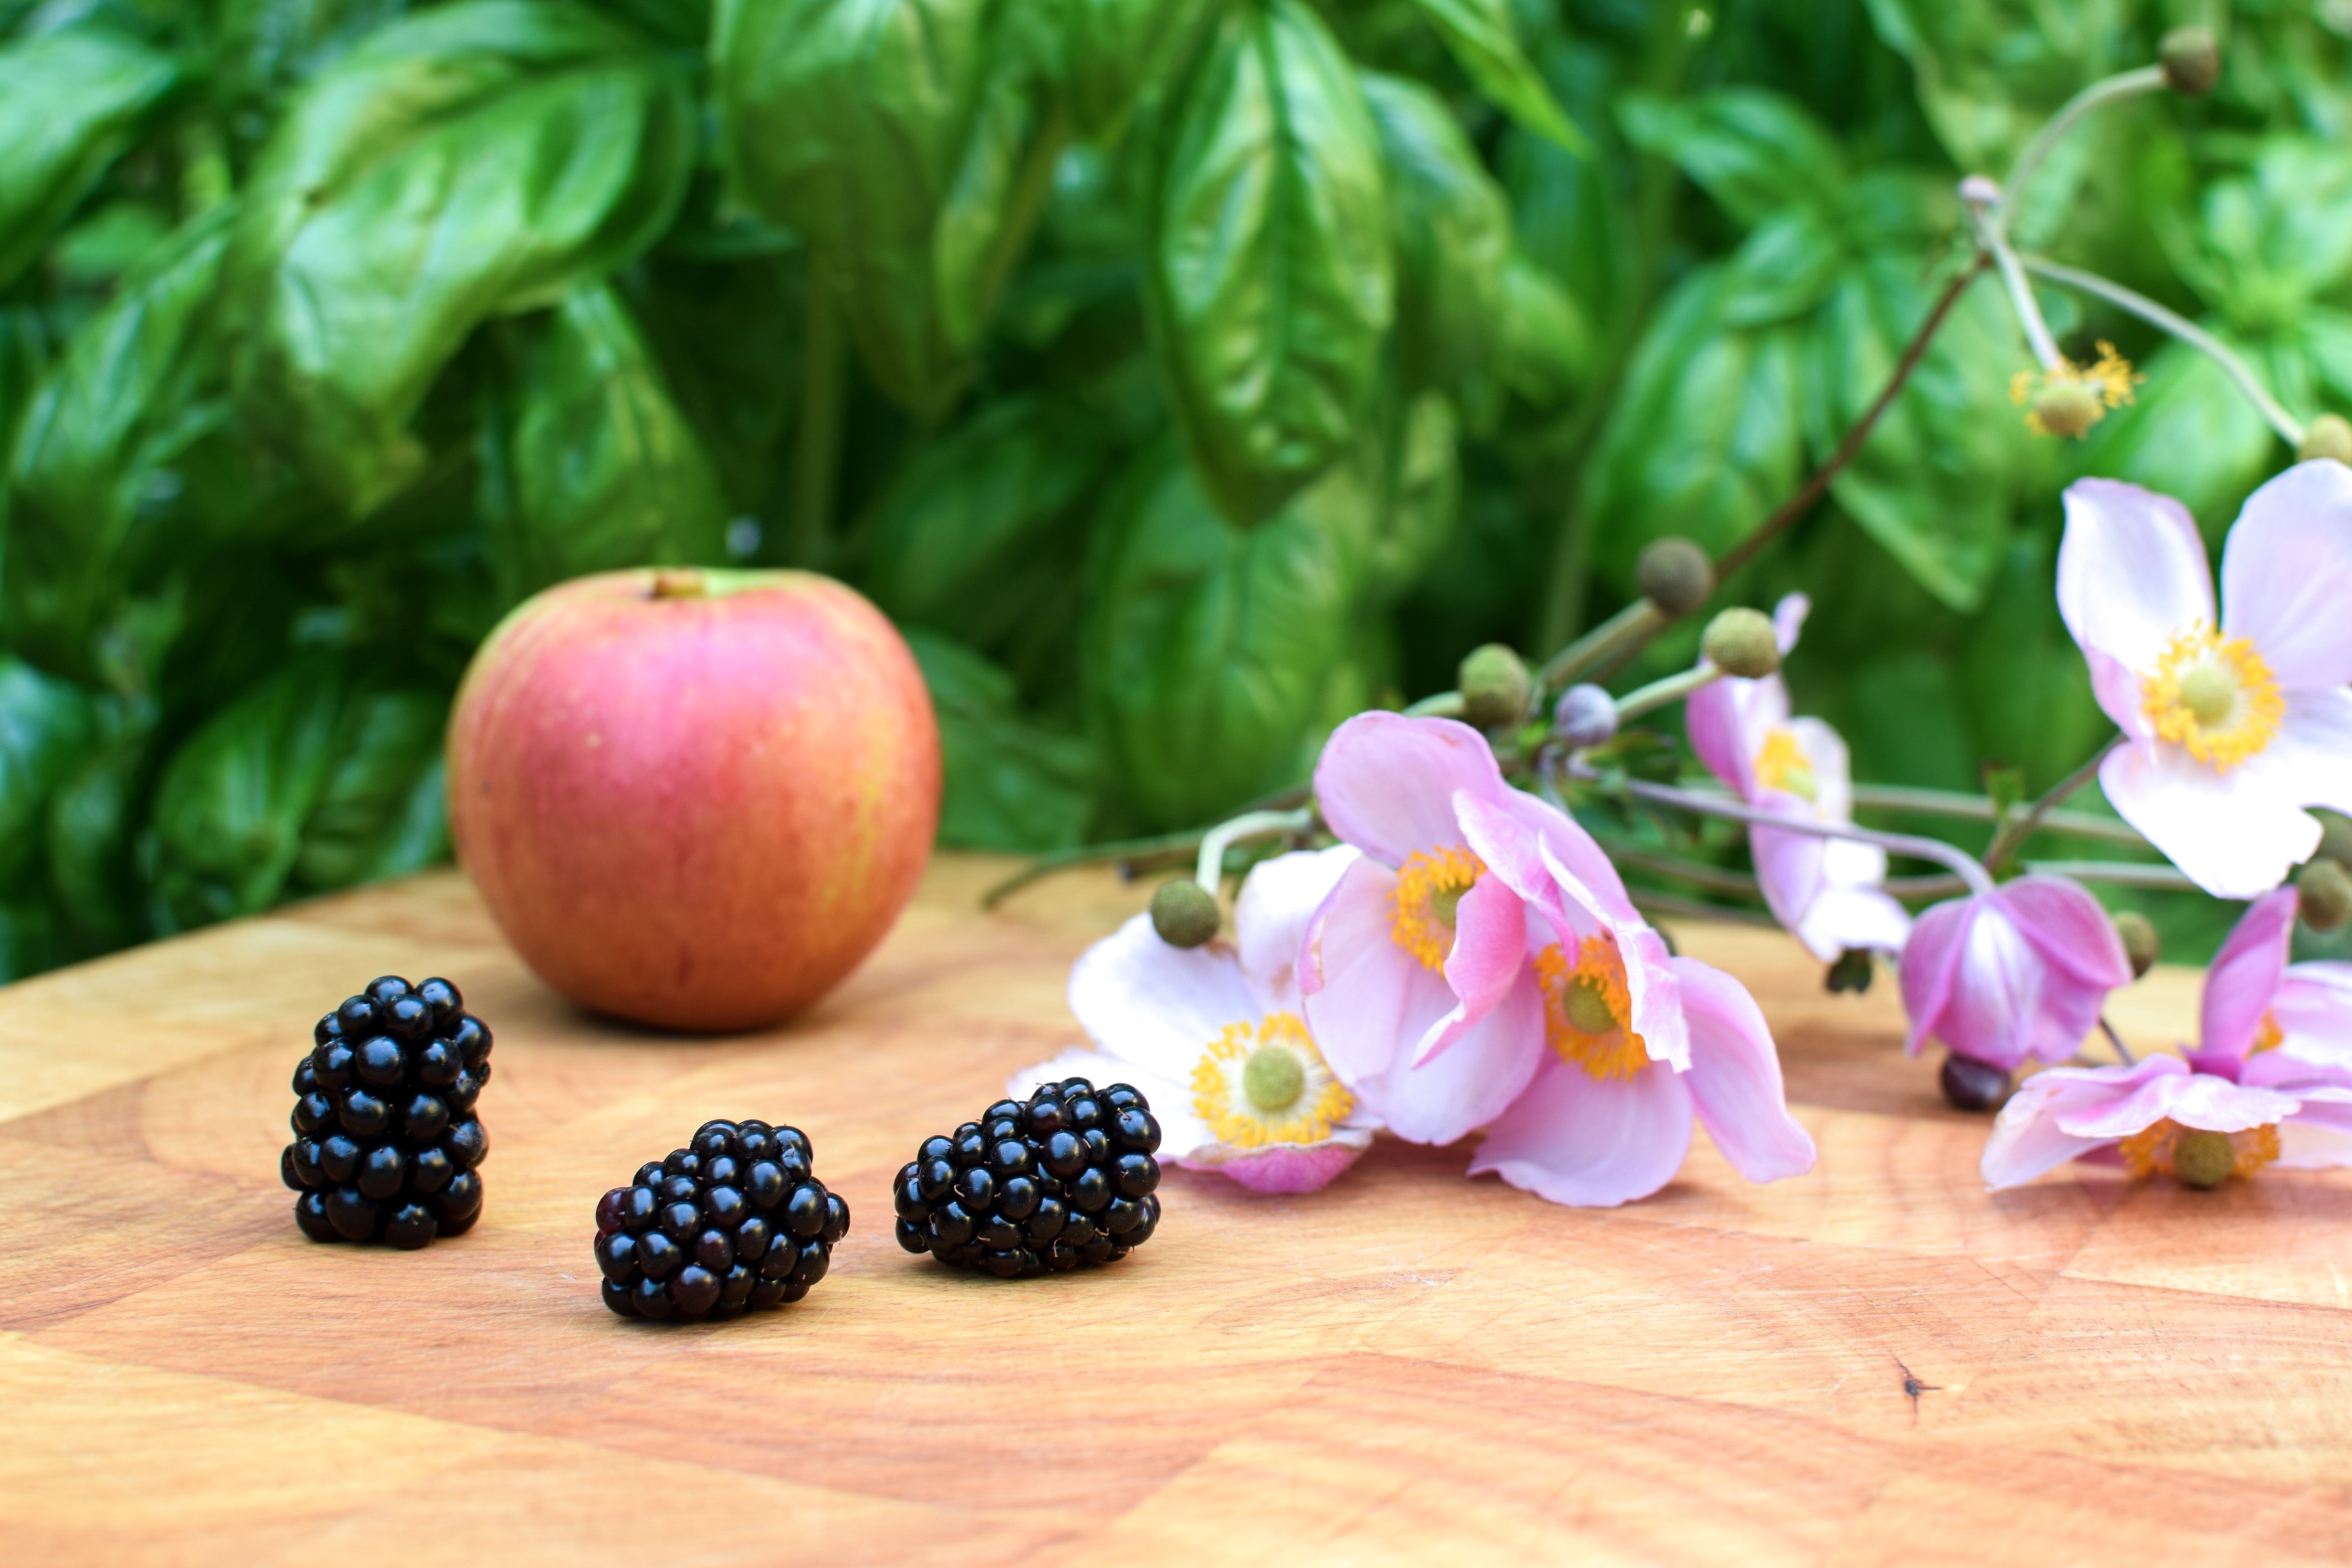 pink anemone poppies with grapes and apples